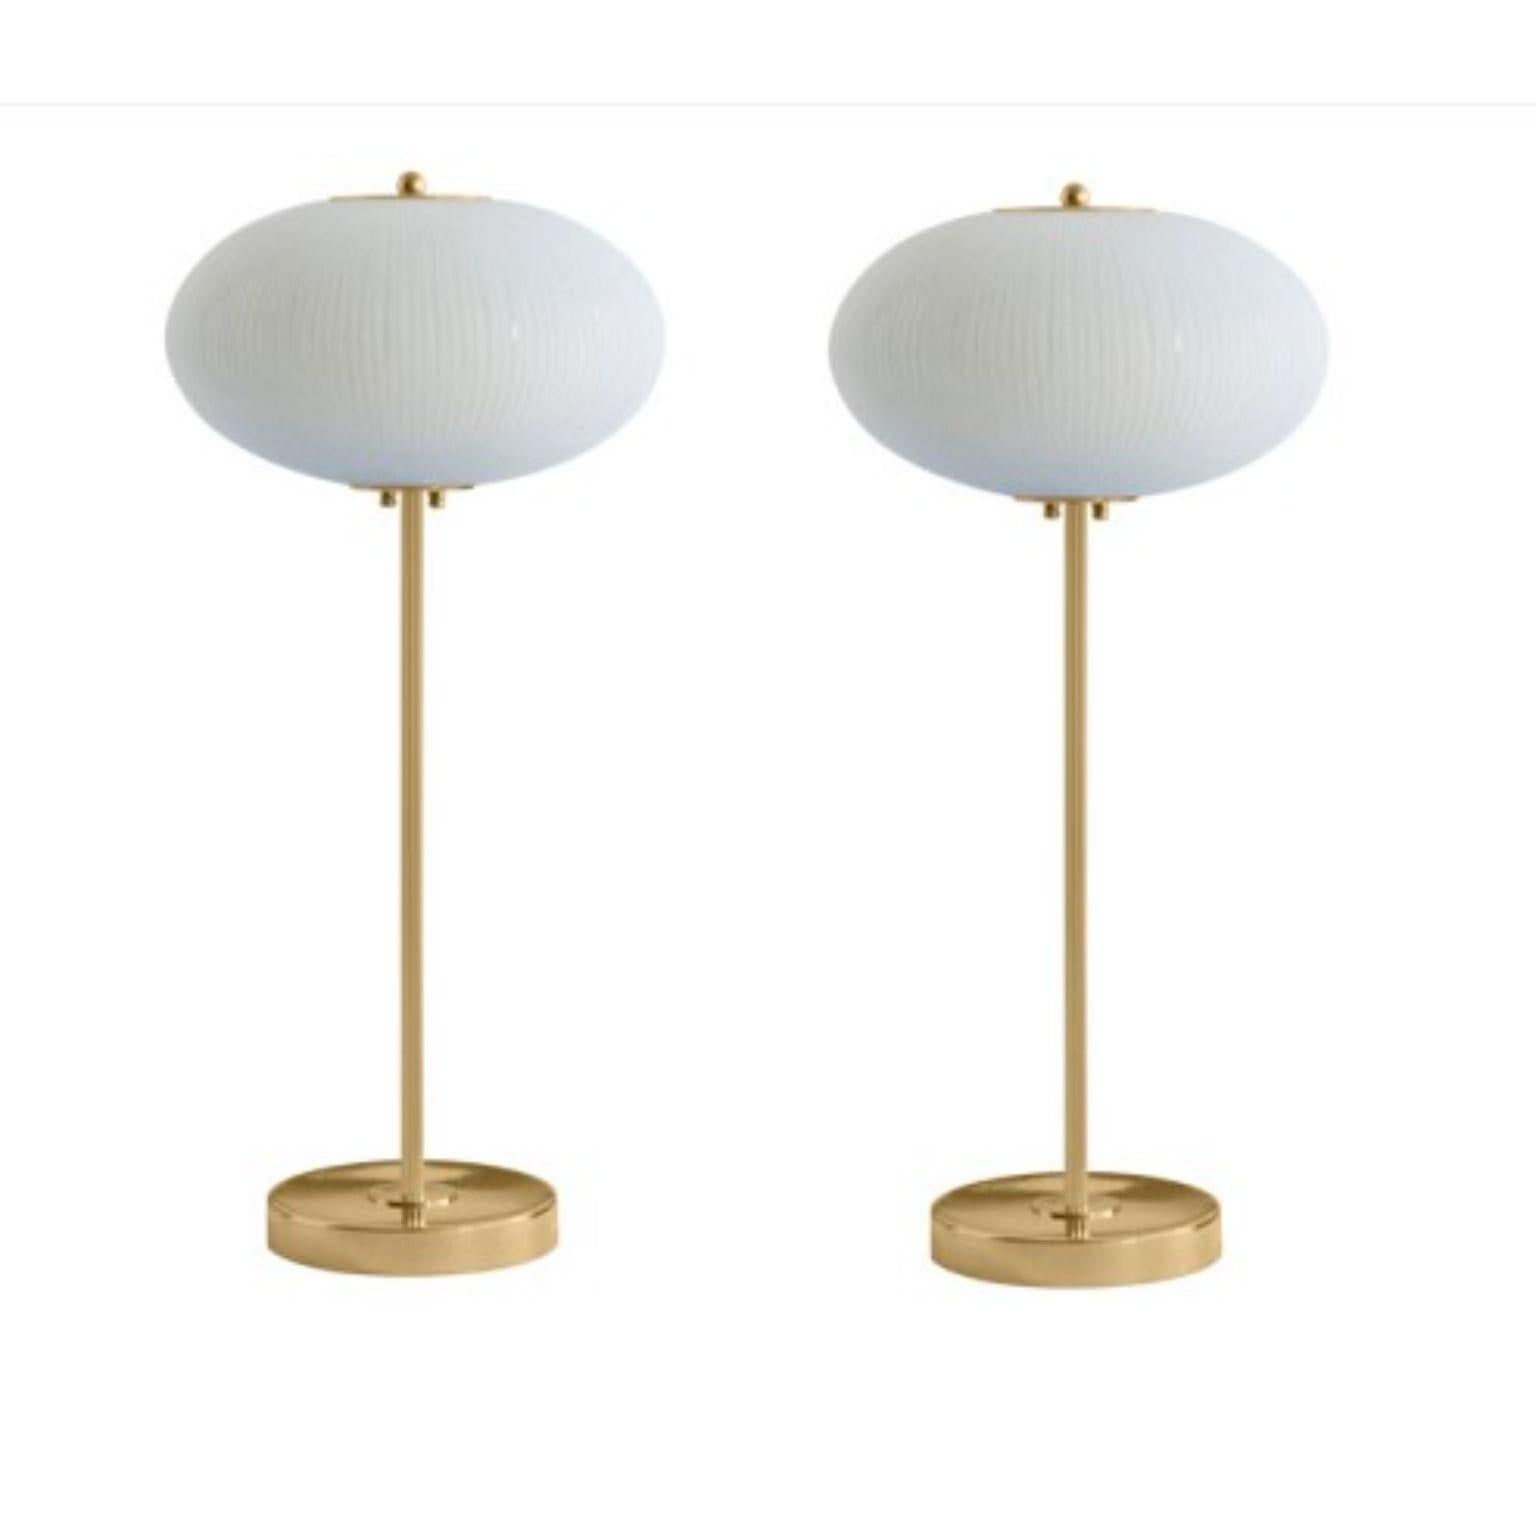 Table lamp China 07 by Magic Circus Editions.
Dimensions: H 70 x W 32 x D 32 cm.
Materials: brass, mouth blown glass sculpted with a diamond saw.
Colour: rich grey.

Available finishes: brass, nickel.
Available colours: enamel soft white, soft